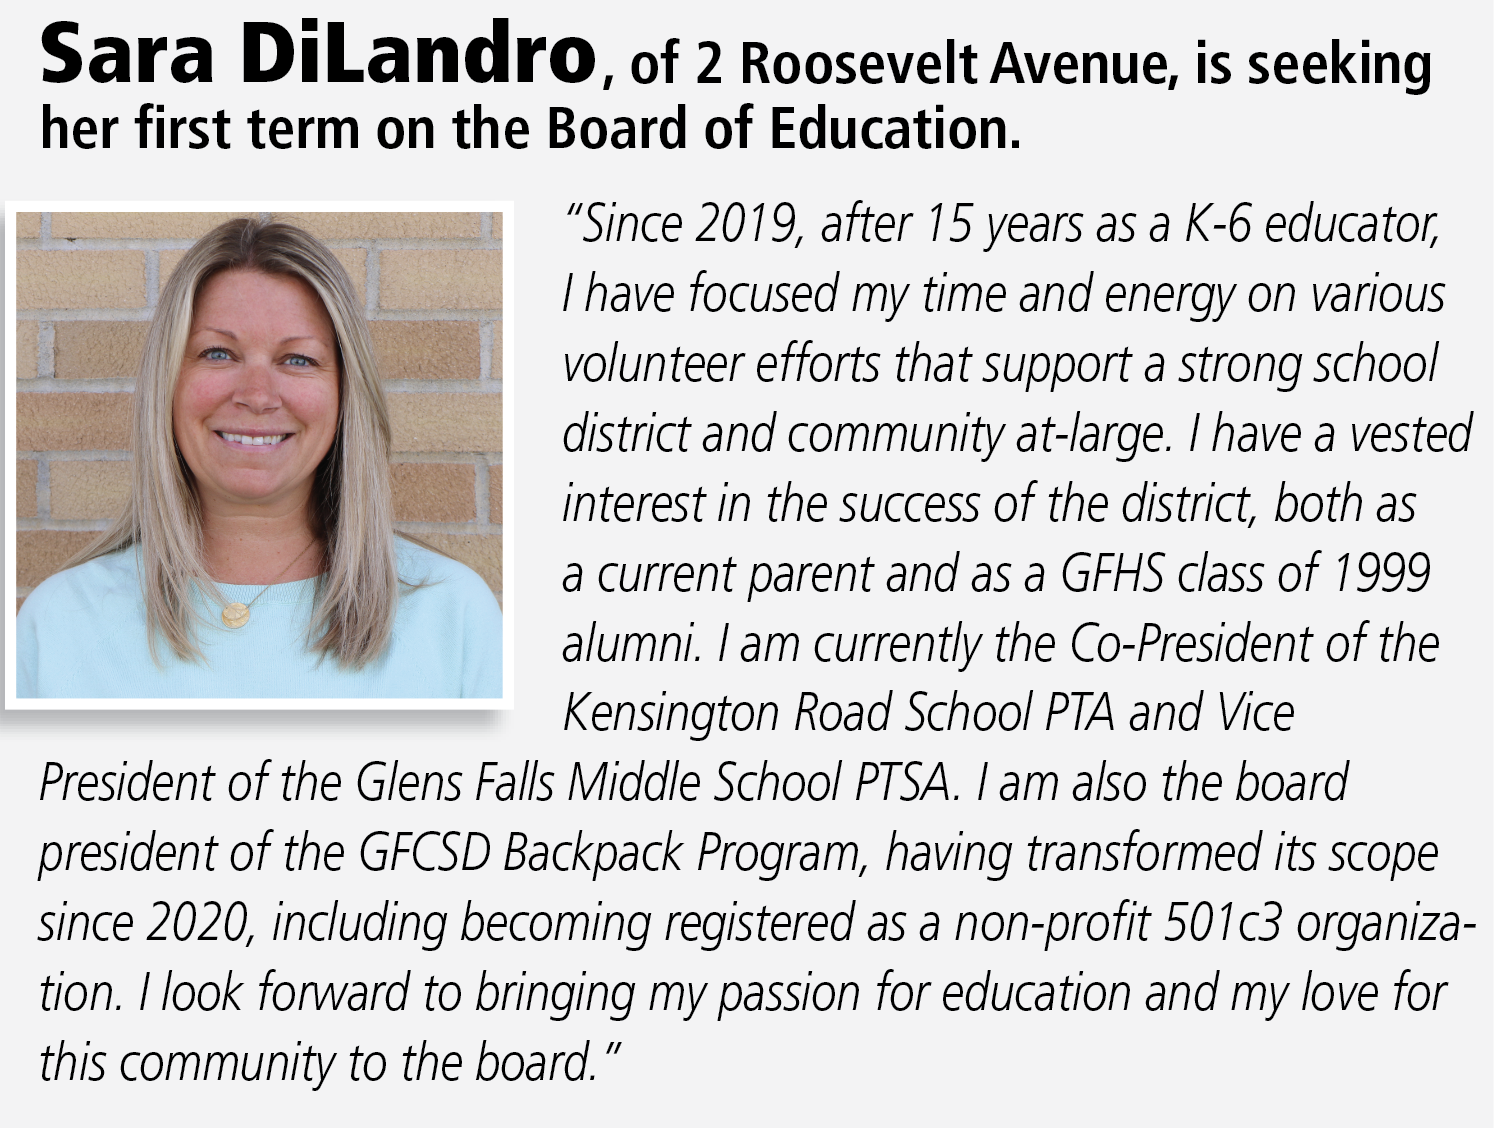 Candidate statement for Sara DiLandro: “Since 2019, after 15 years as a K-6 educator, I have focused my time and energy on various volunteer efforts that support a strong school district and community at-large. I have a vested interest in the success of the district, both as a current parent and as a GFHS class of 1999 alumni. I am currently the Co-President of the Kensington Road School PTA and Vice President of the Glens Falls Middle School PTSA. I am also the board president of the GFCSD Backpack Program, having transformed its scope since 2020, including becoming registered as a non-profit 501c3 organization. I look forward to bringing my passion for education and my love for this community to the board.”